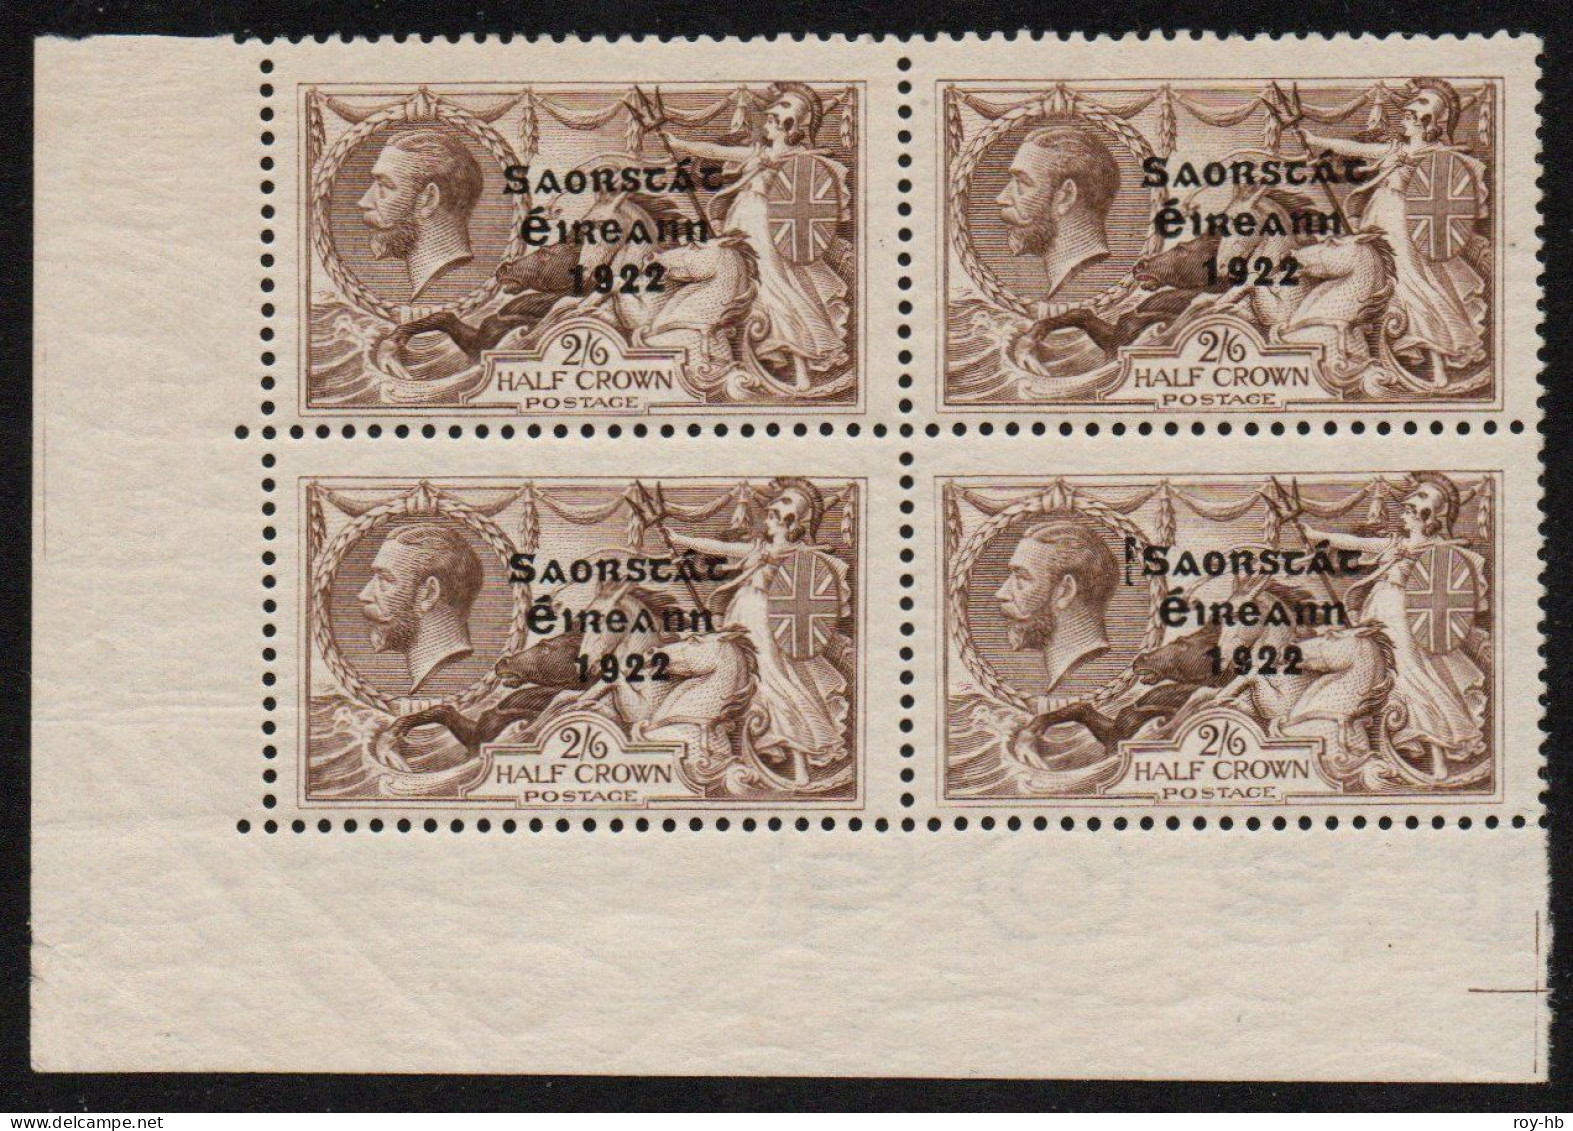 1922 Thom 2/6 Bottom Left Corner Block Of 4 From Plate 3/5 R With Numerous Re-entries + Guide Block. . - Unused Stamps